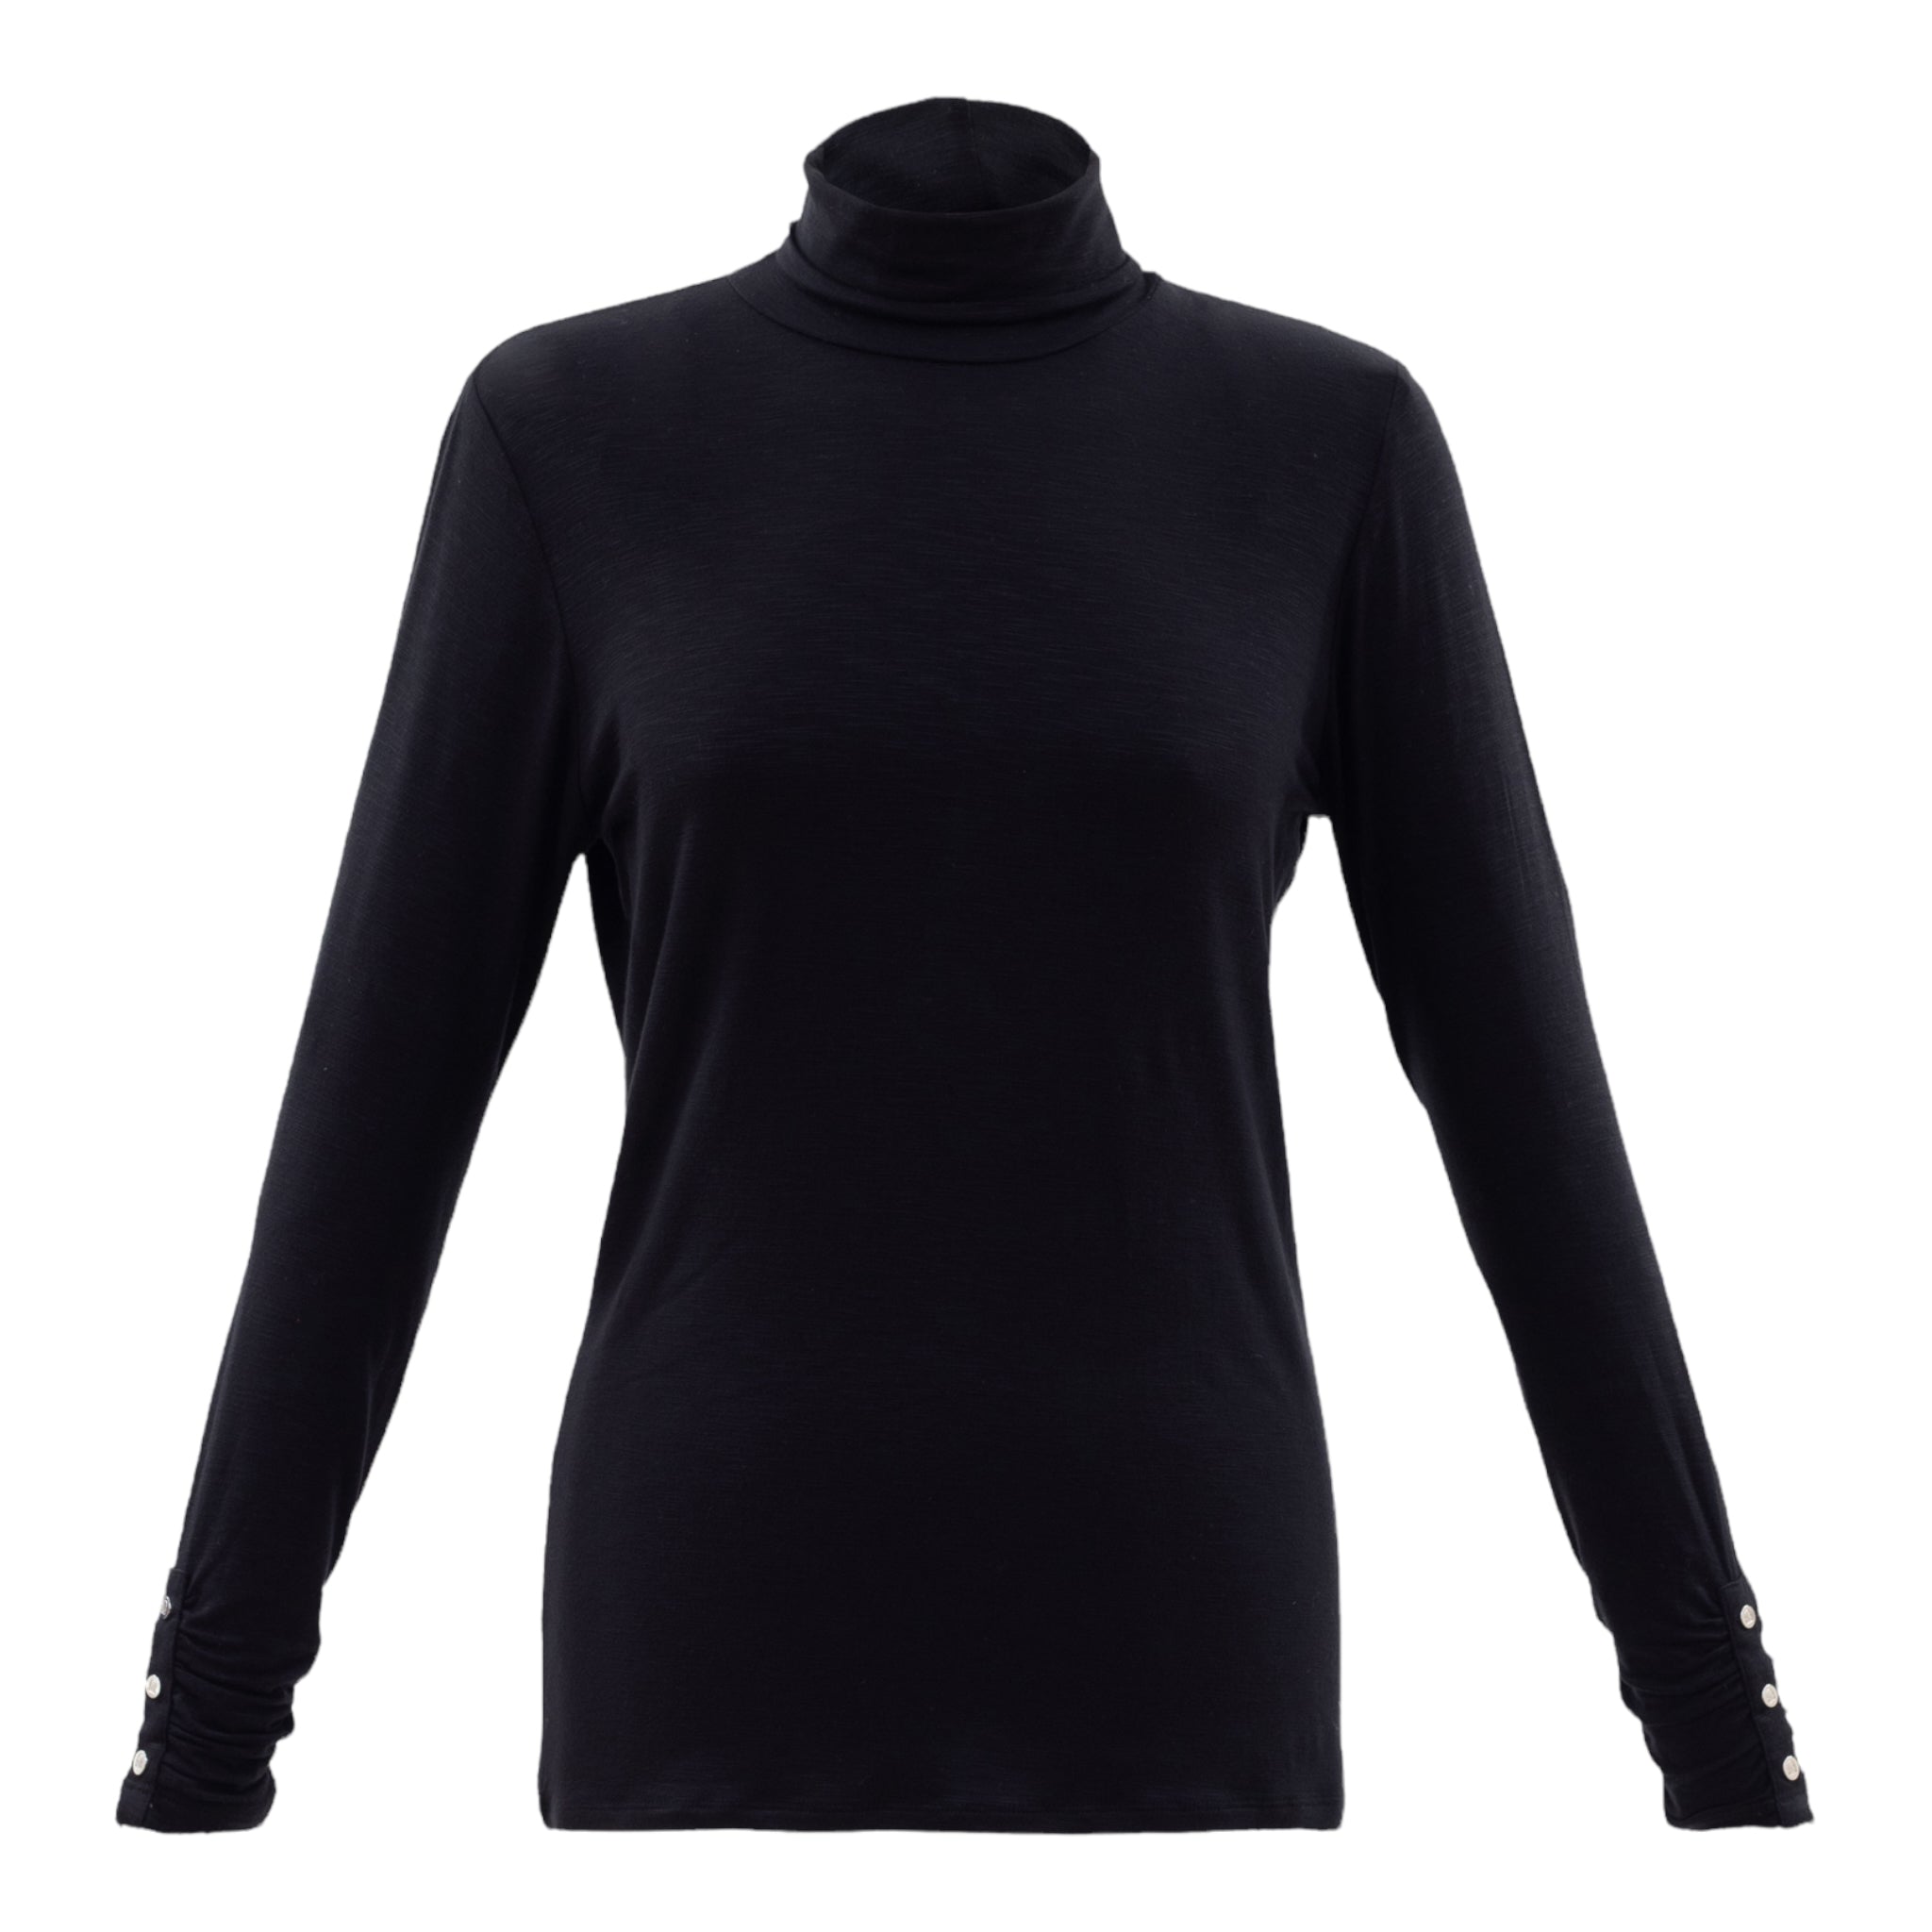 Marble Fashions High Neck Top Black